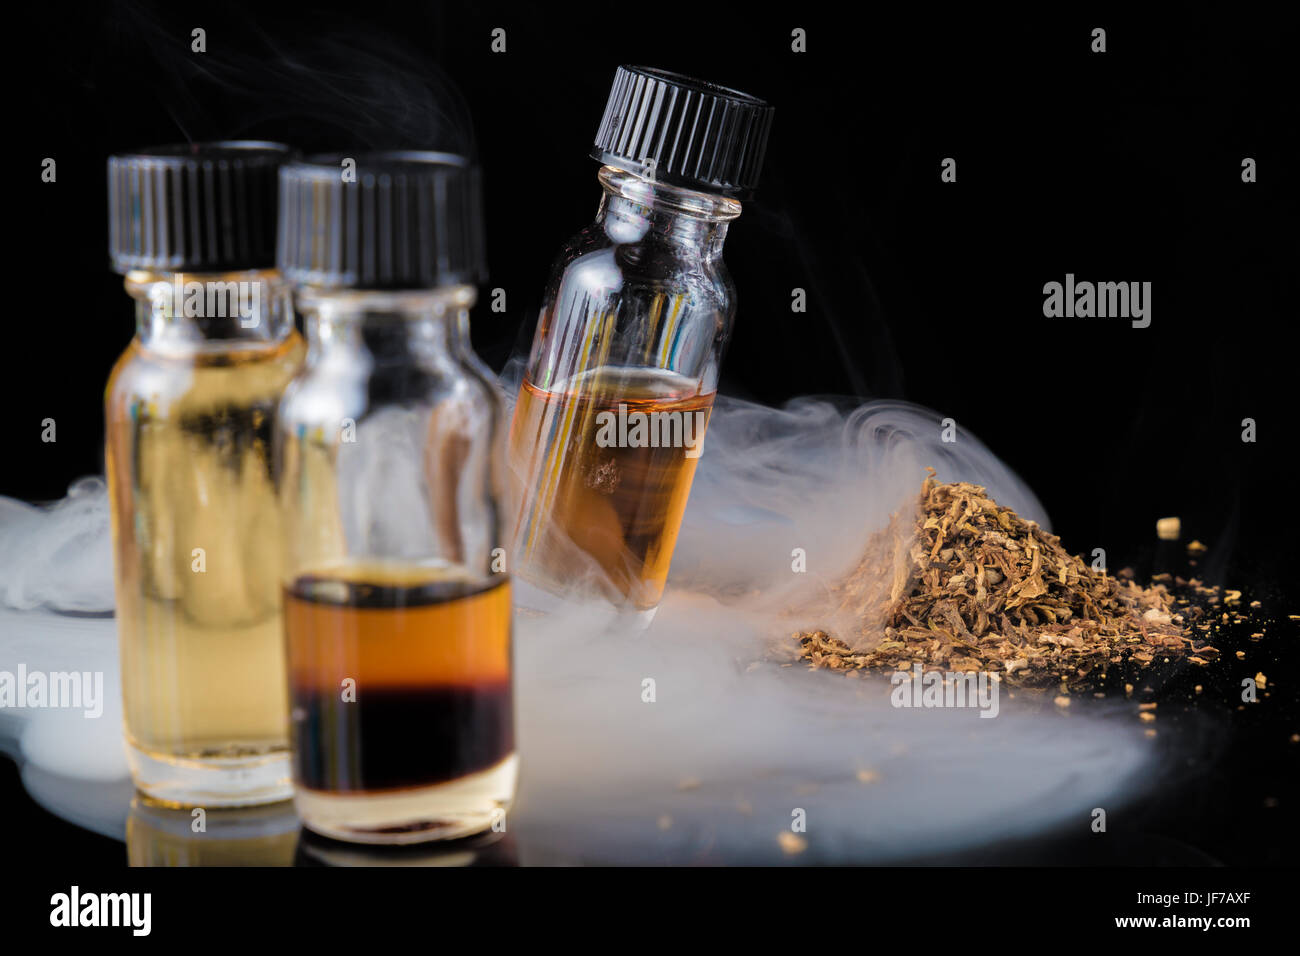 E-liquid bottles next to grinded tobacco leaves and smoke cloud Stock Photo